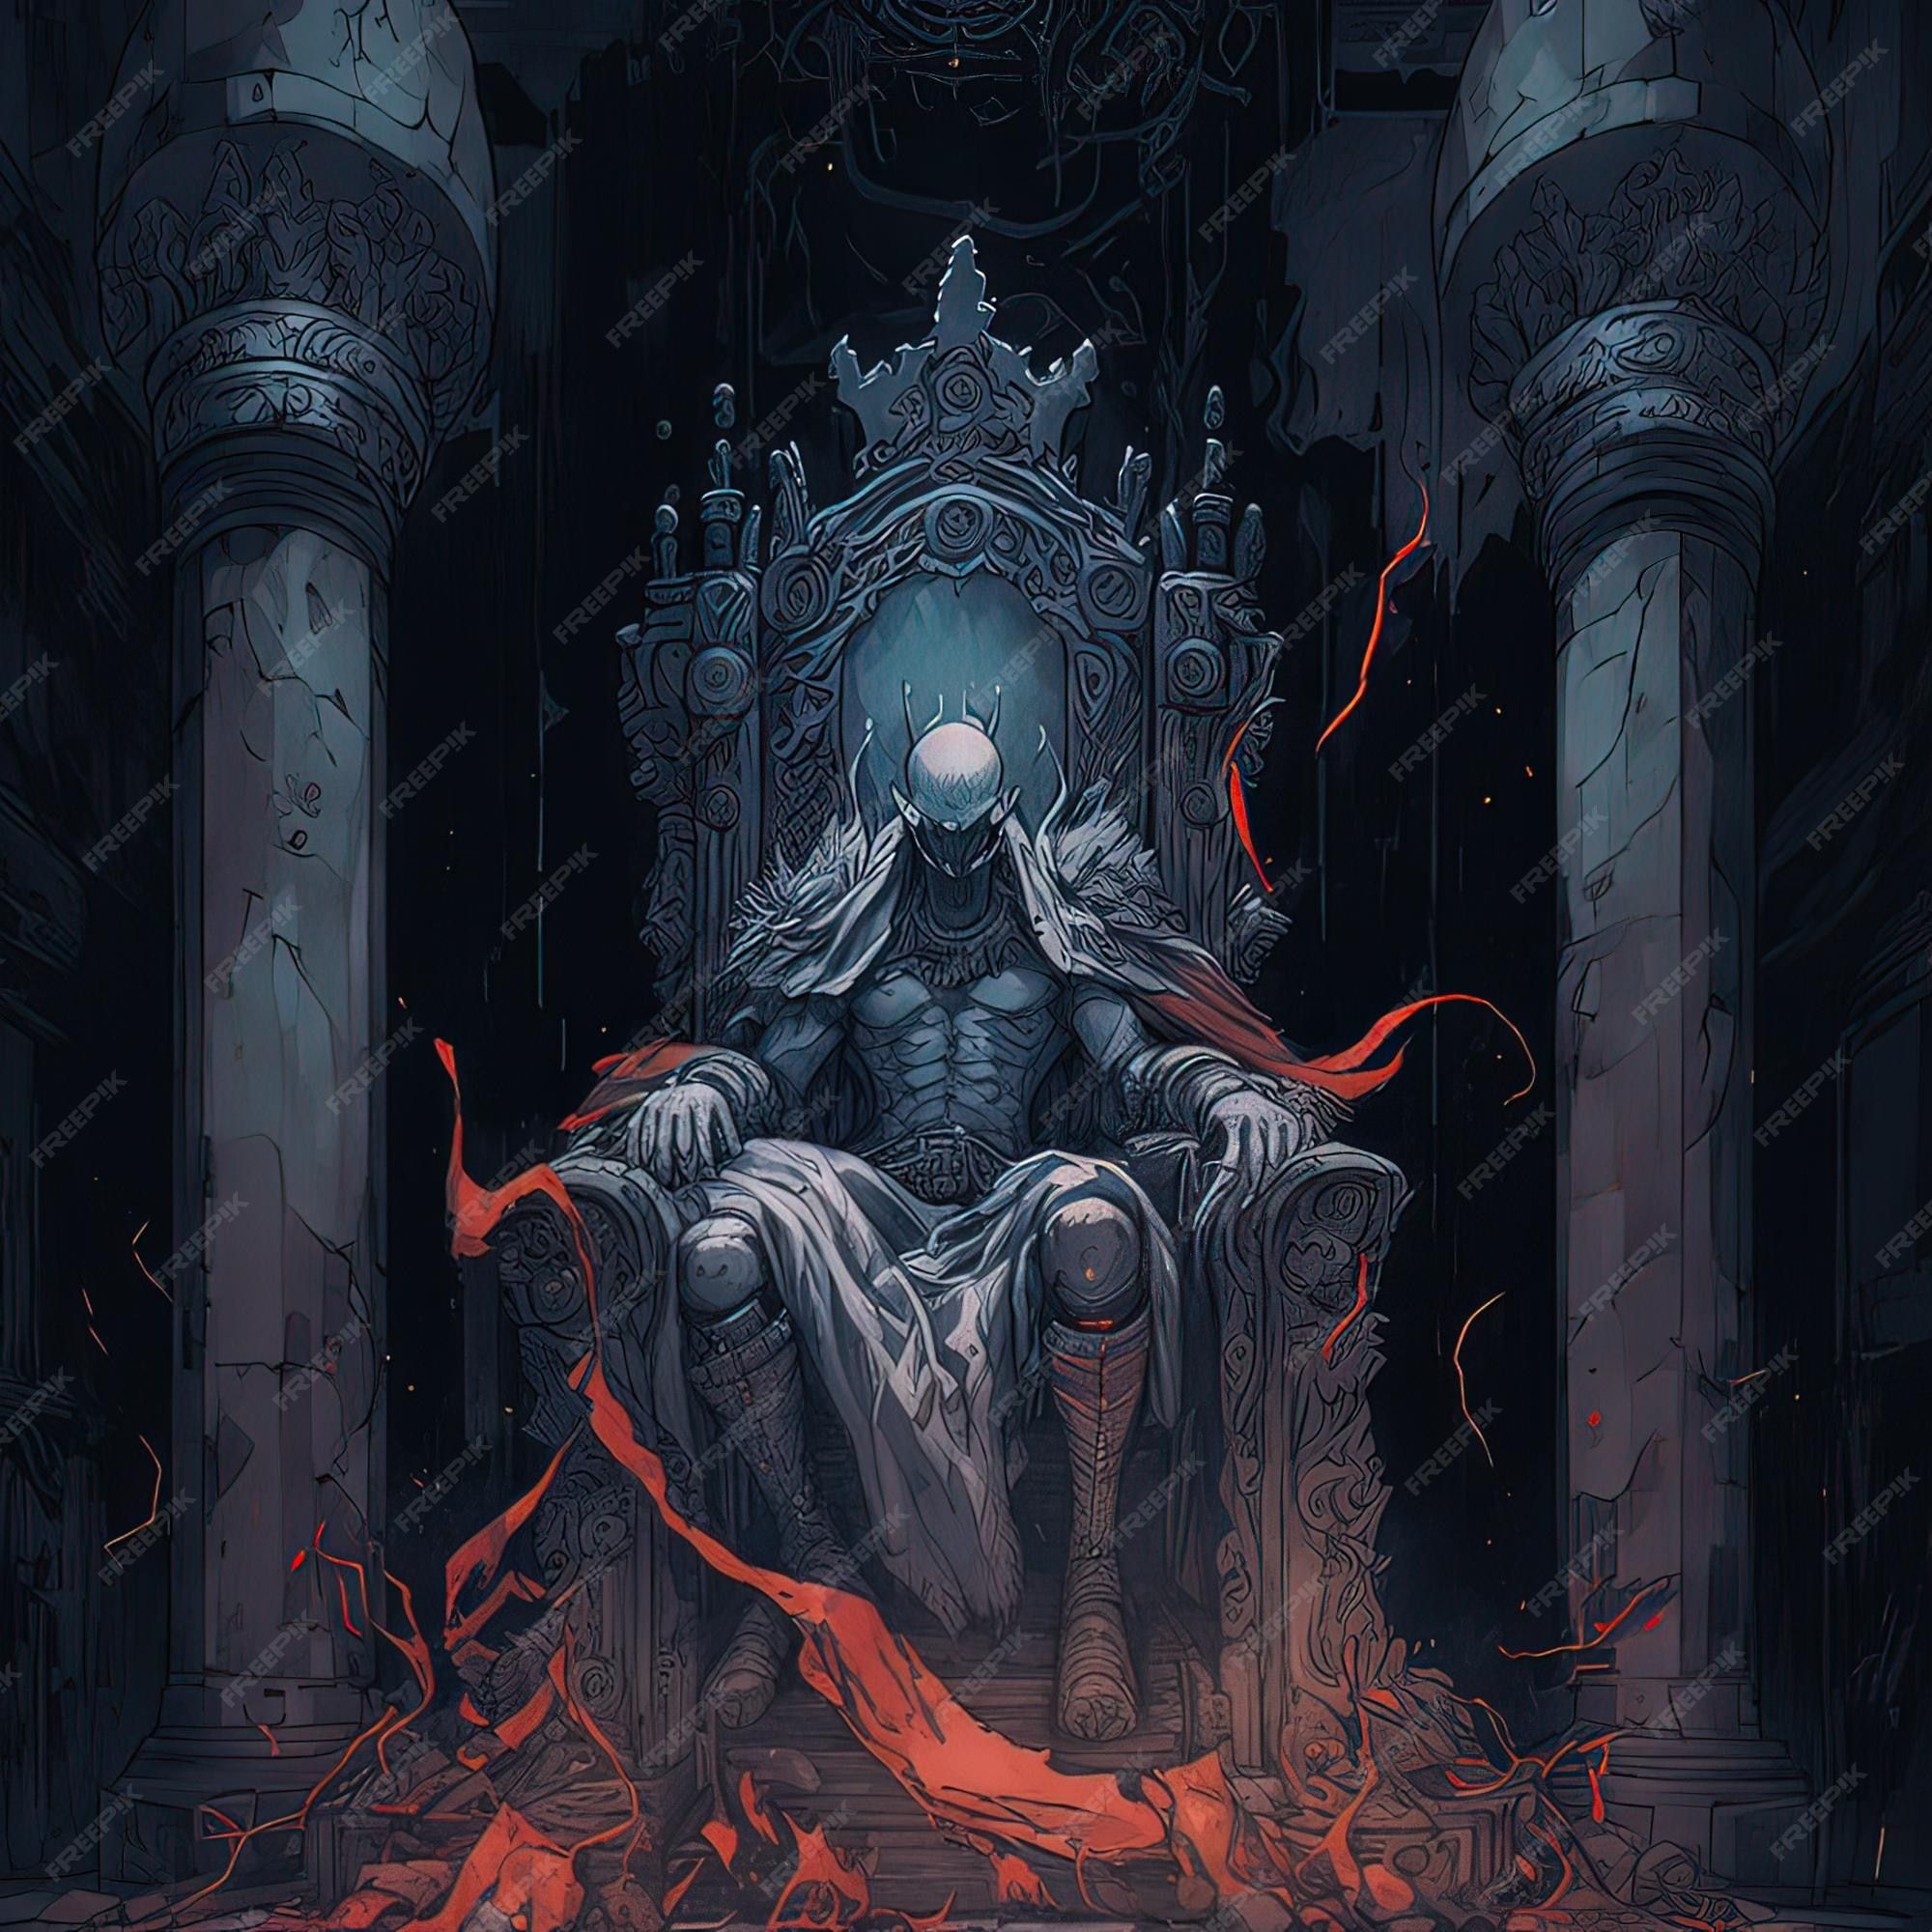 Premium Photo  Fantasy concept portrait of the mysterious undead ghost king  floating on a destroyed throne in a castle ruins digital art style  illustration painting